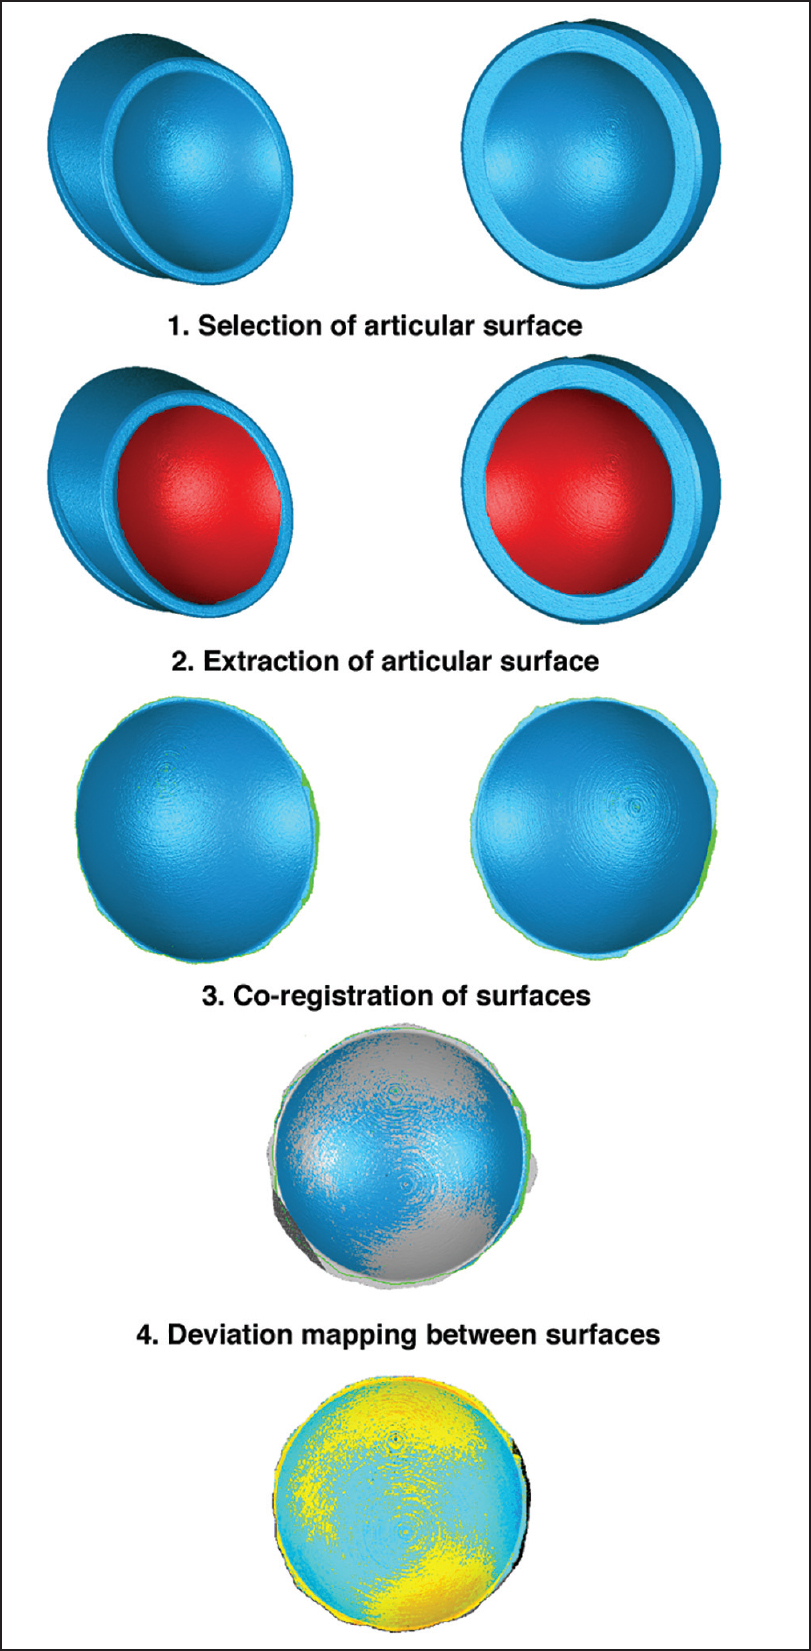 Figure 2: Visual representation of the steps performed by analyzing the articular surface variability between systems